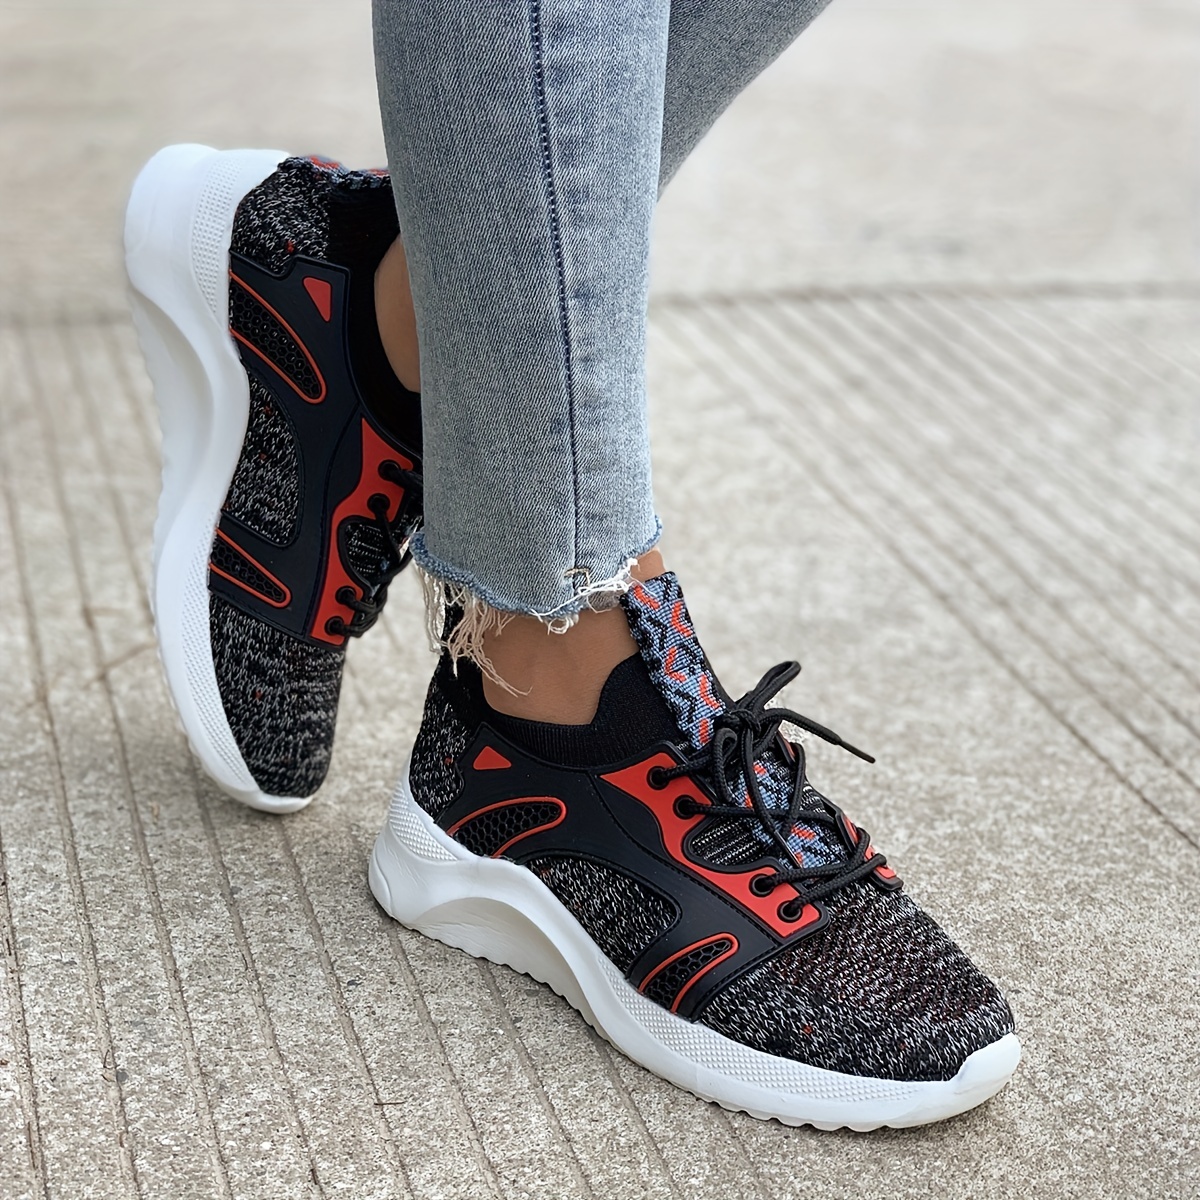 Women's Knitted Sports Shoes, Comfort Lace Up Low Top Running & Tennis  Sneakers, Breathable Gym Athletic Shoes